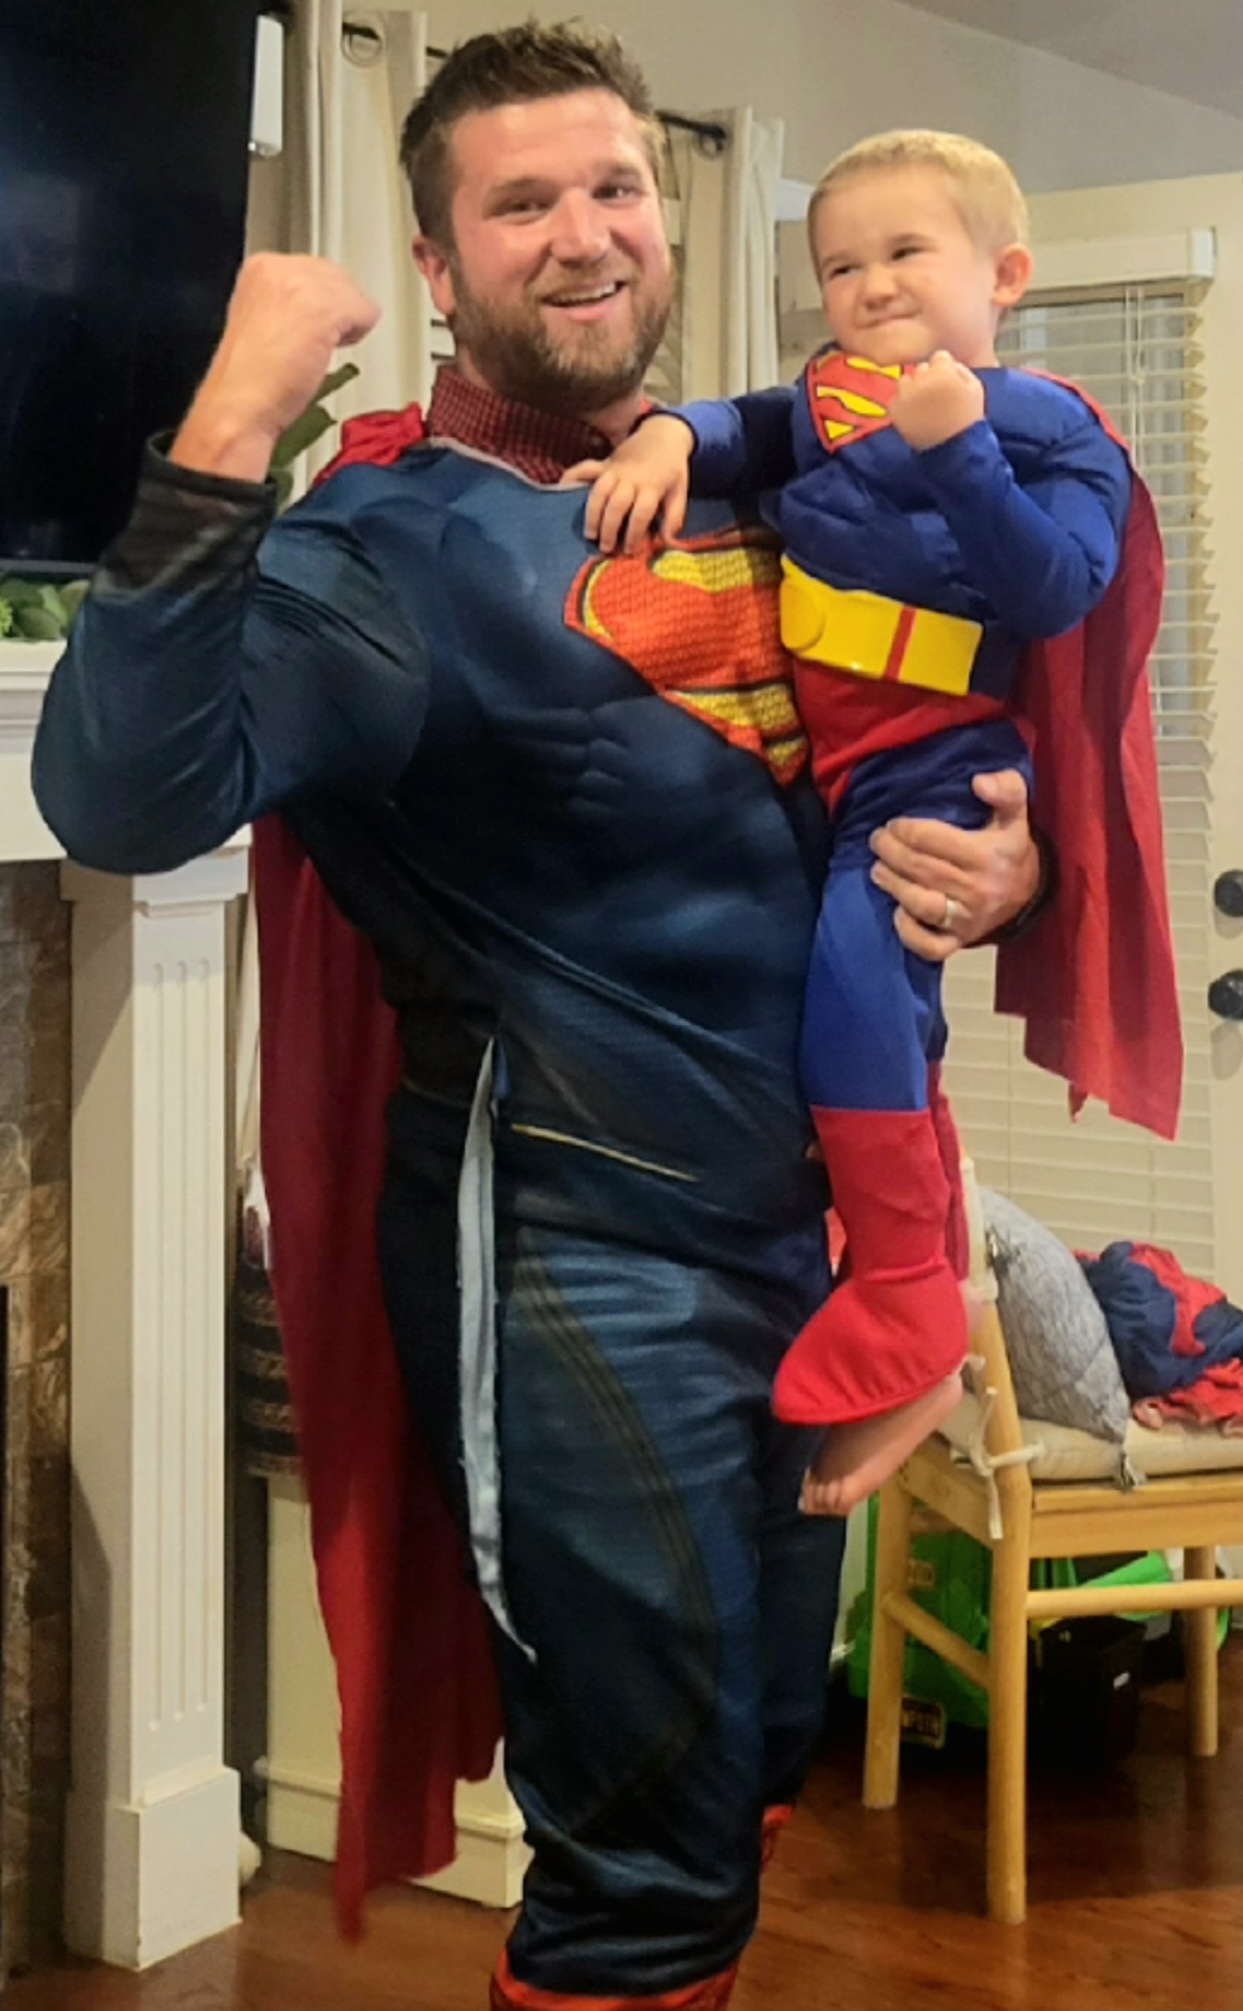 One adult holding a child. Both have a raised fist and are wearing blue outfits, red capes, and have a large red "S" in a yellow diamond on chests.